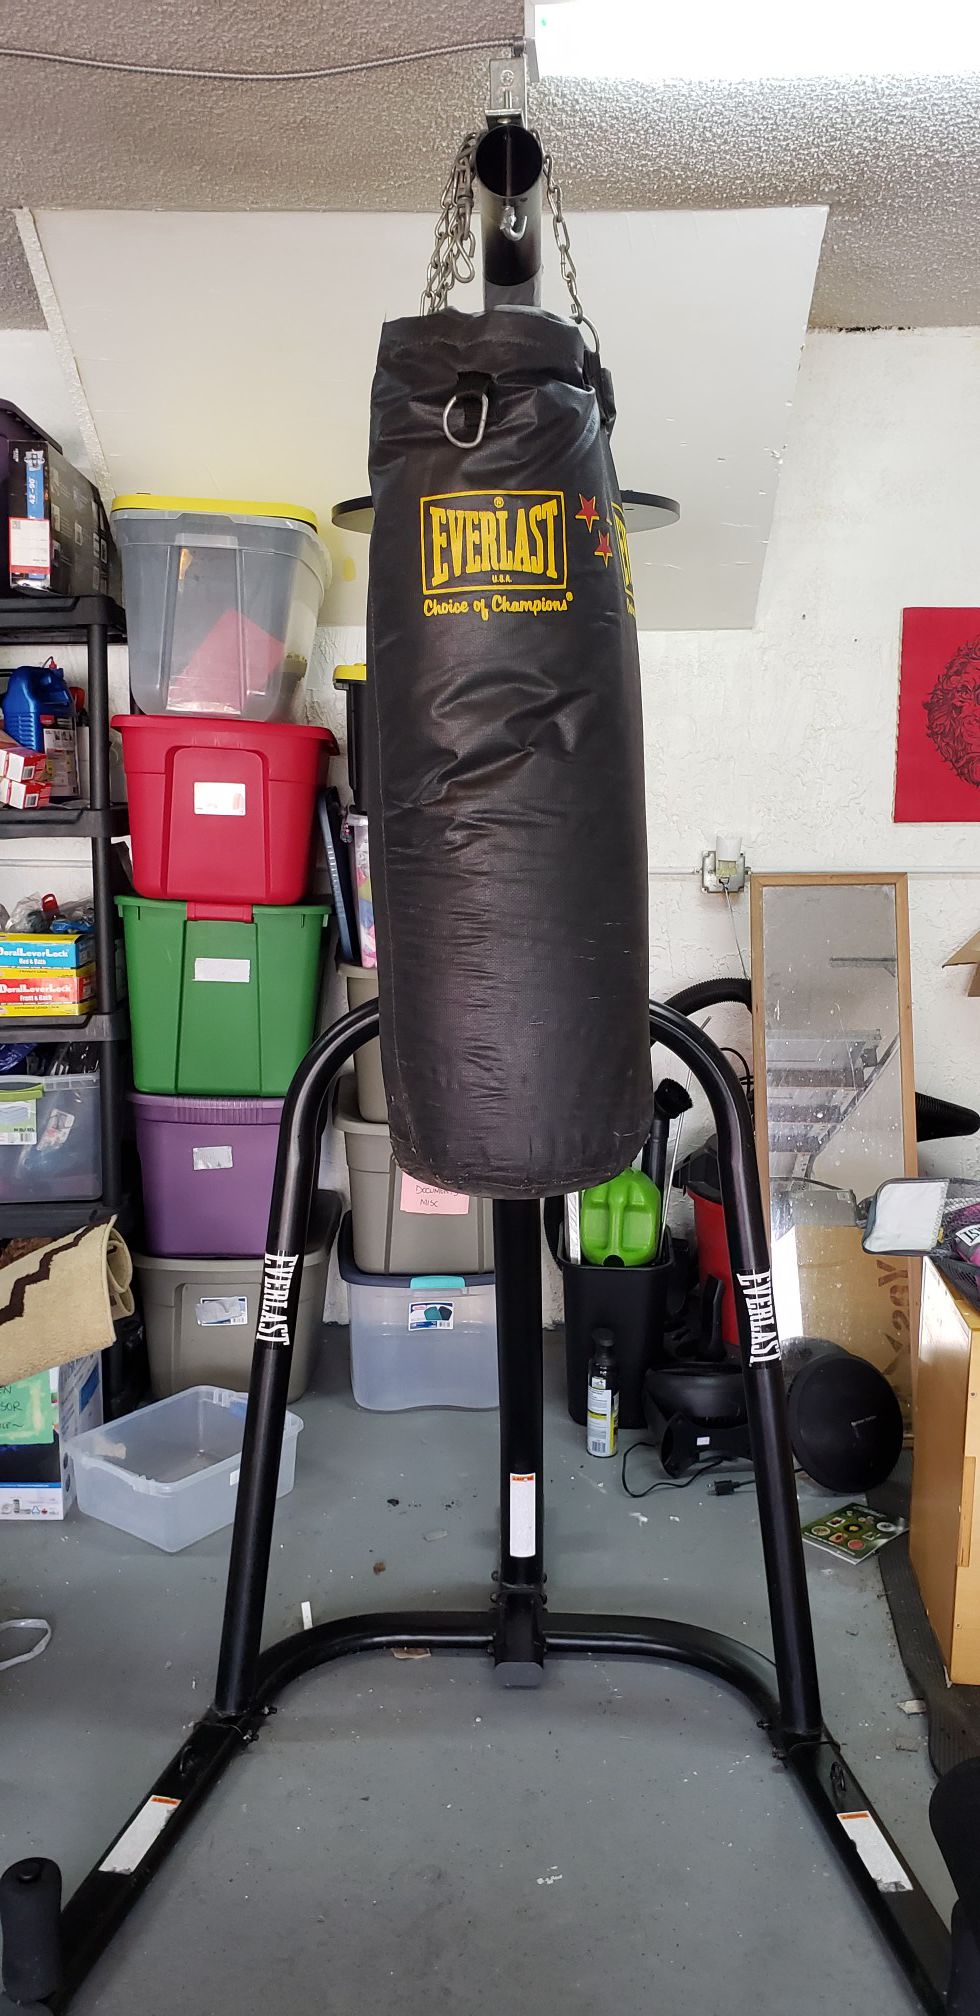 Punching bag stand, bag, and gloves.